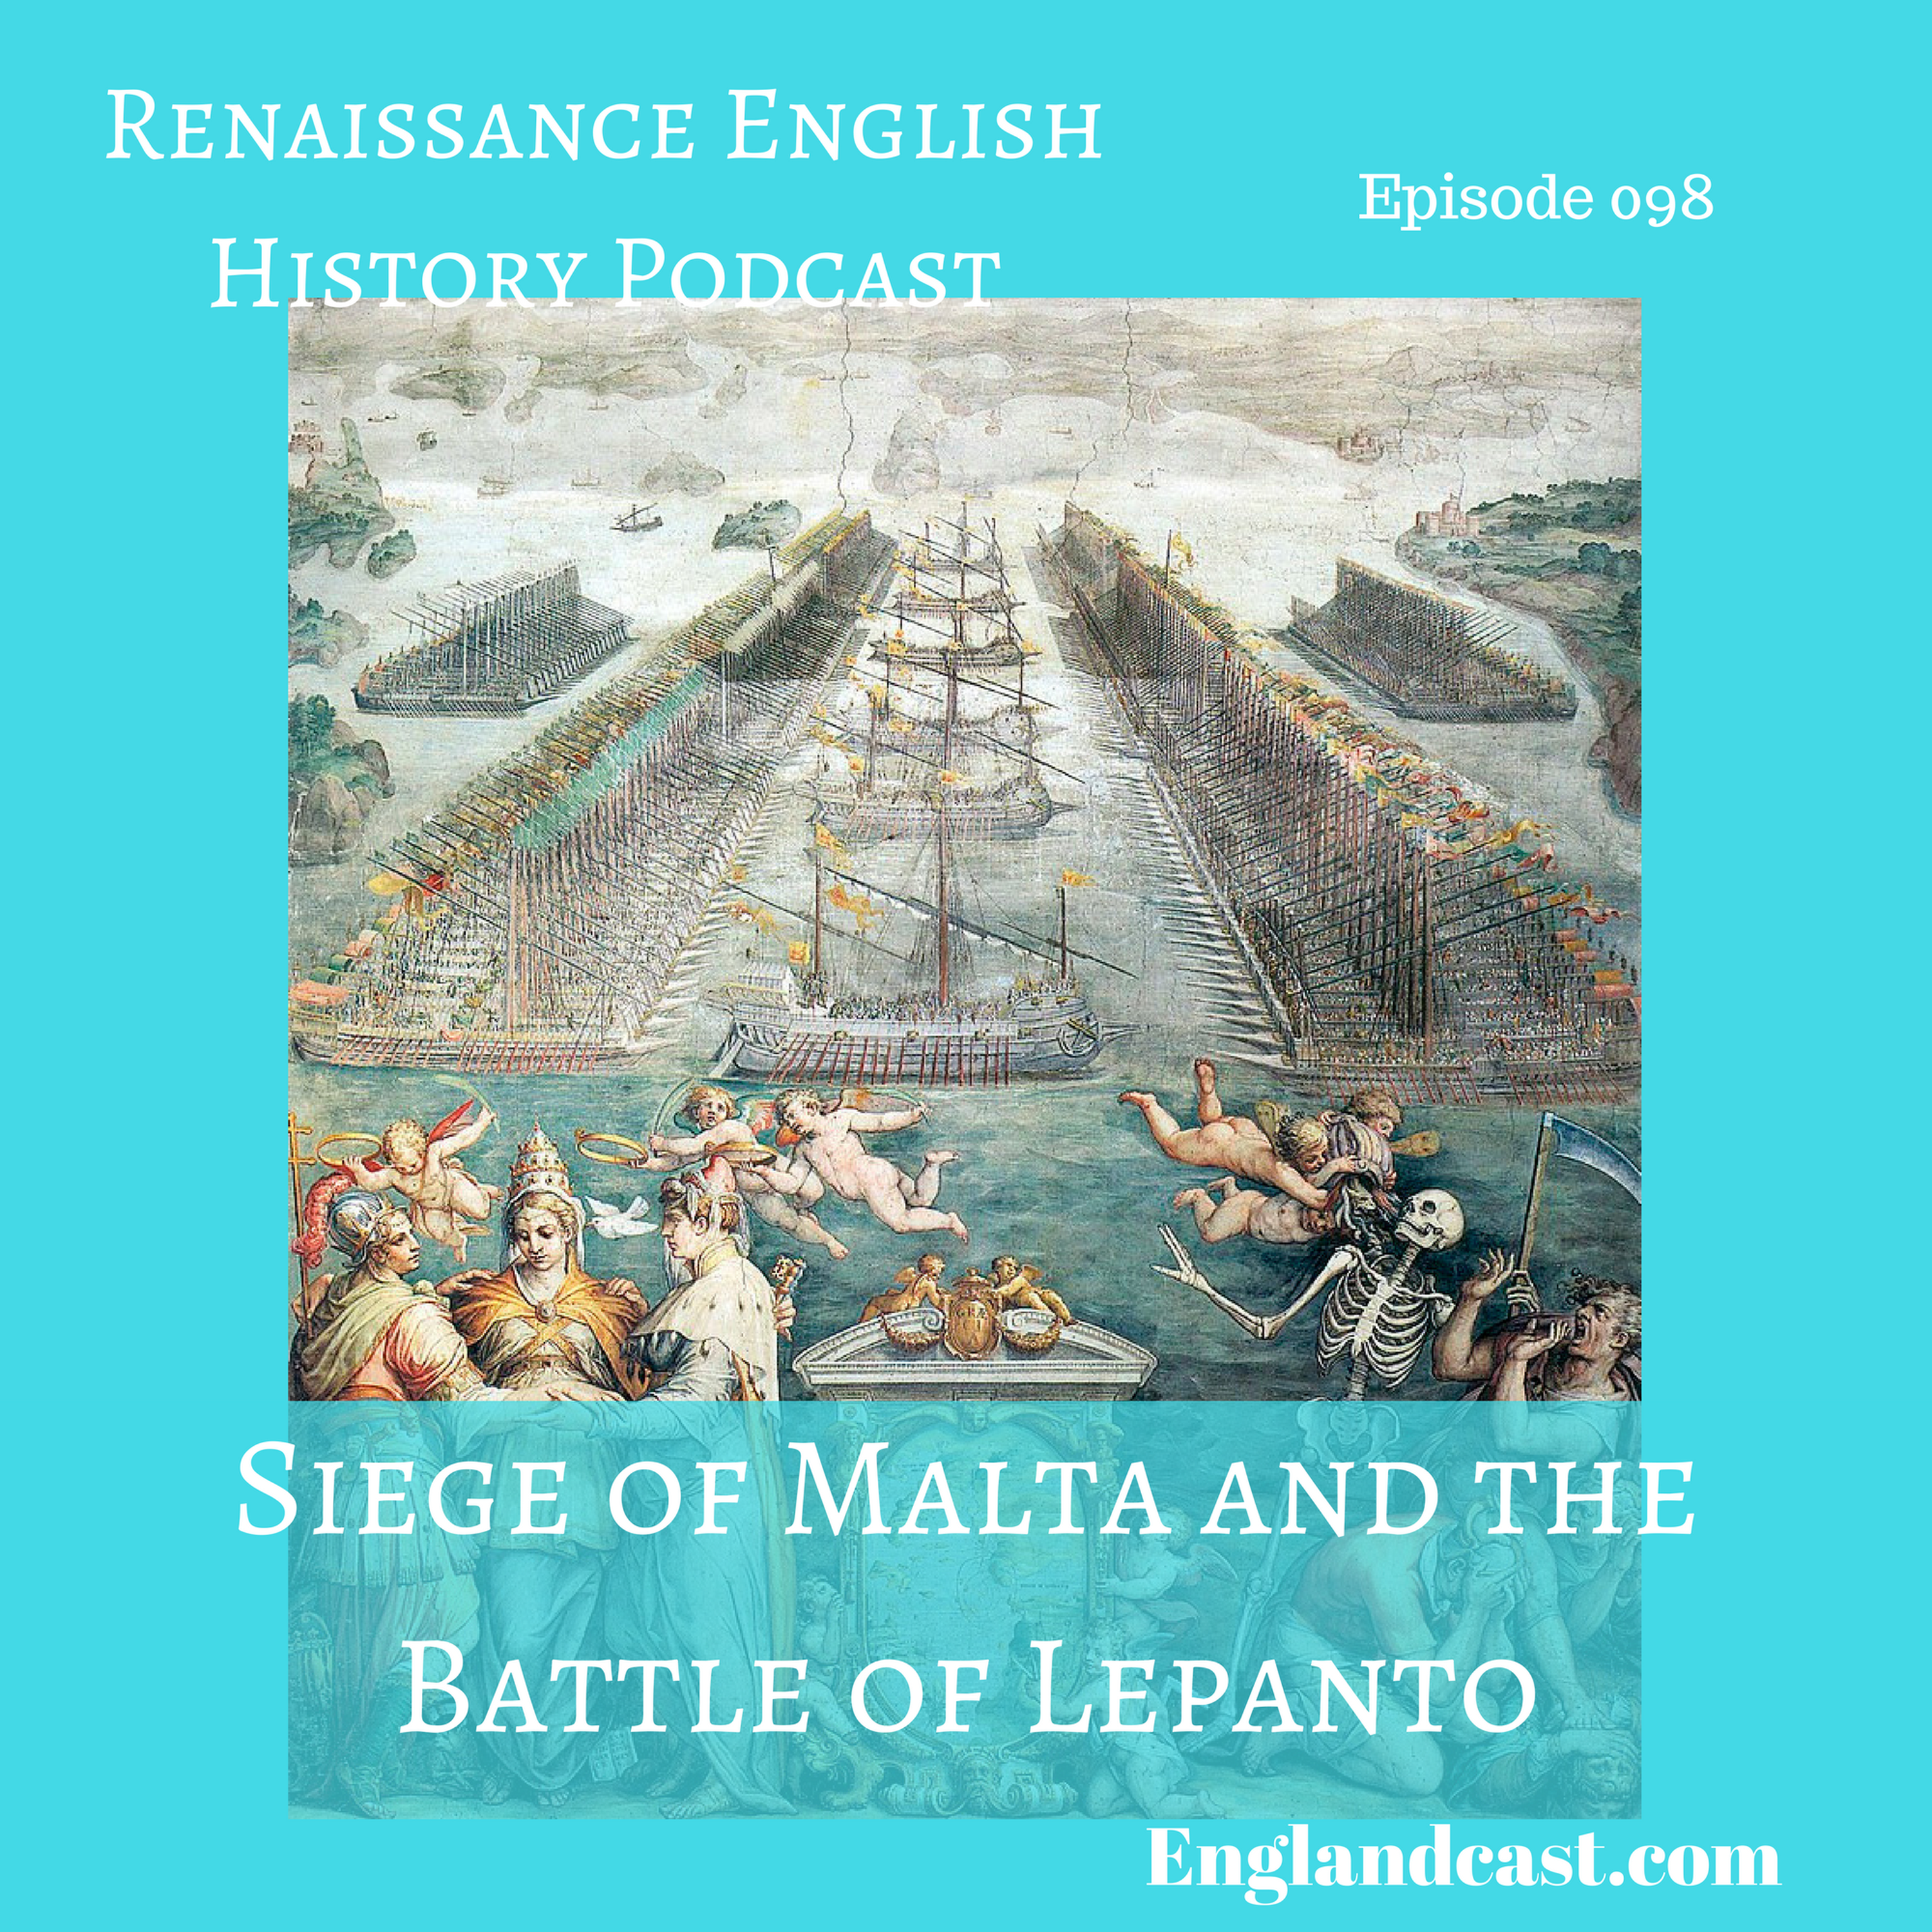 Episode 098: The Siege of Malta and the Battle of Lepanto